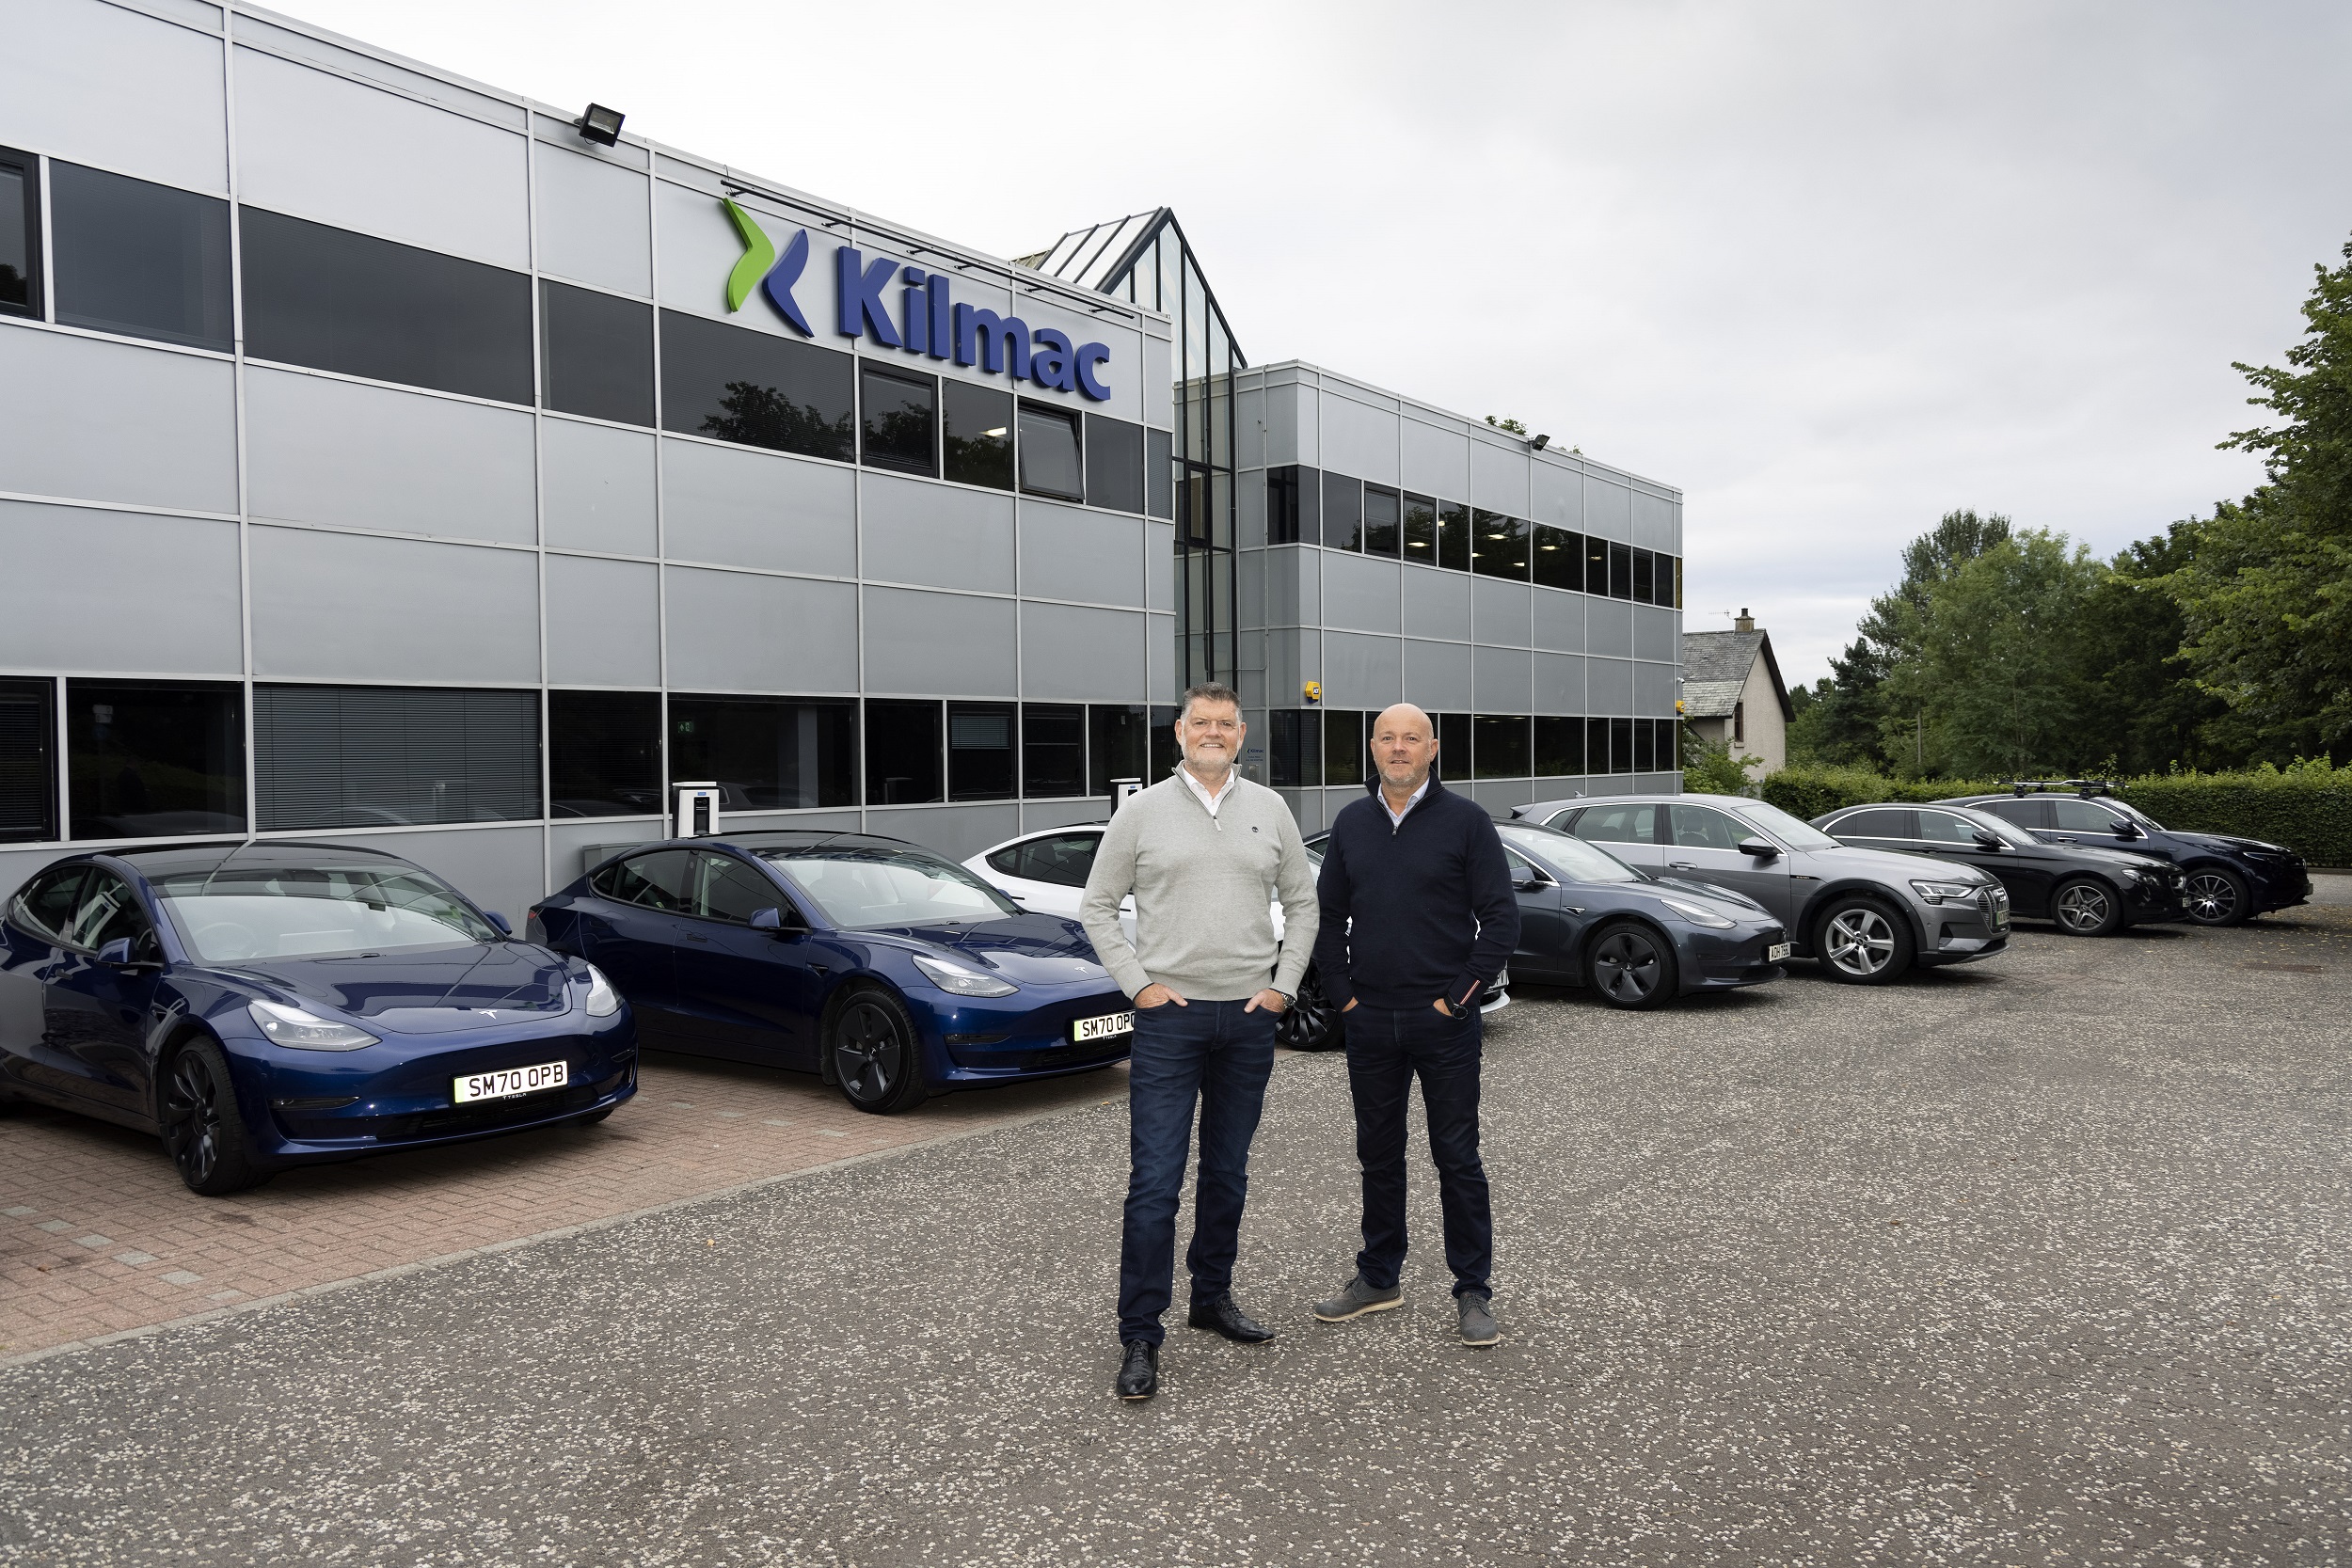 Kilmac Limited moves into employee ownership